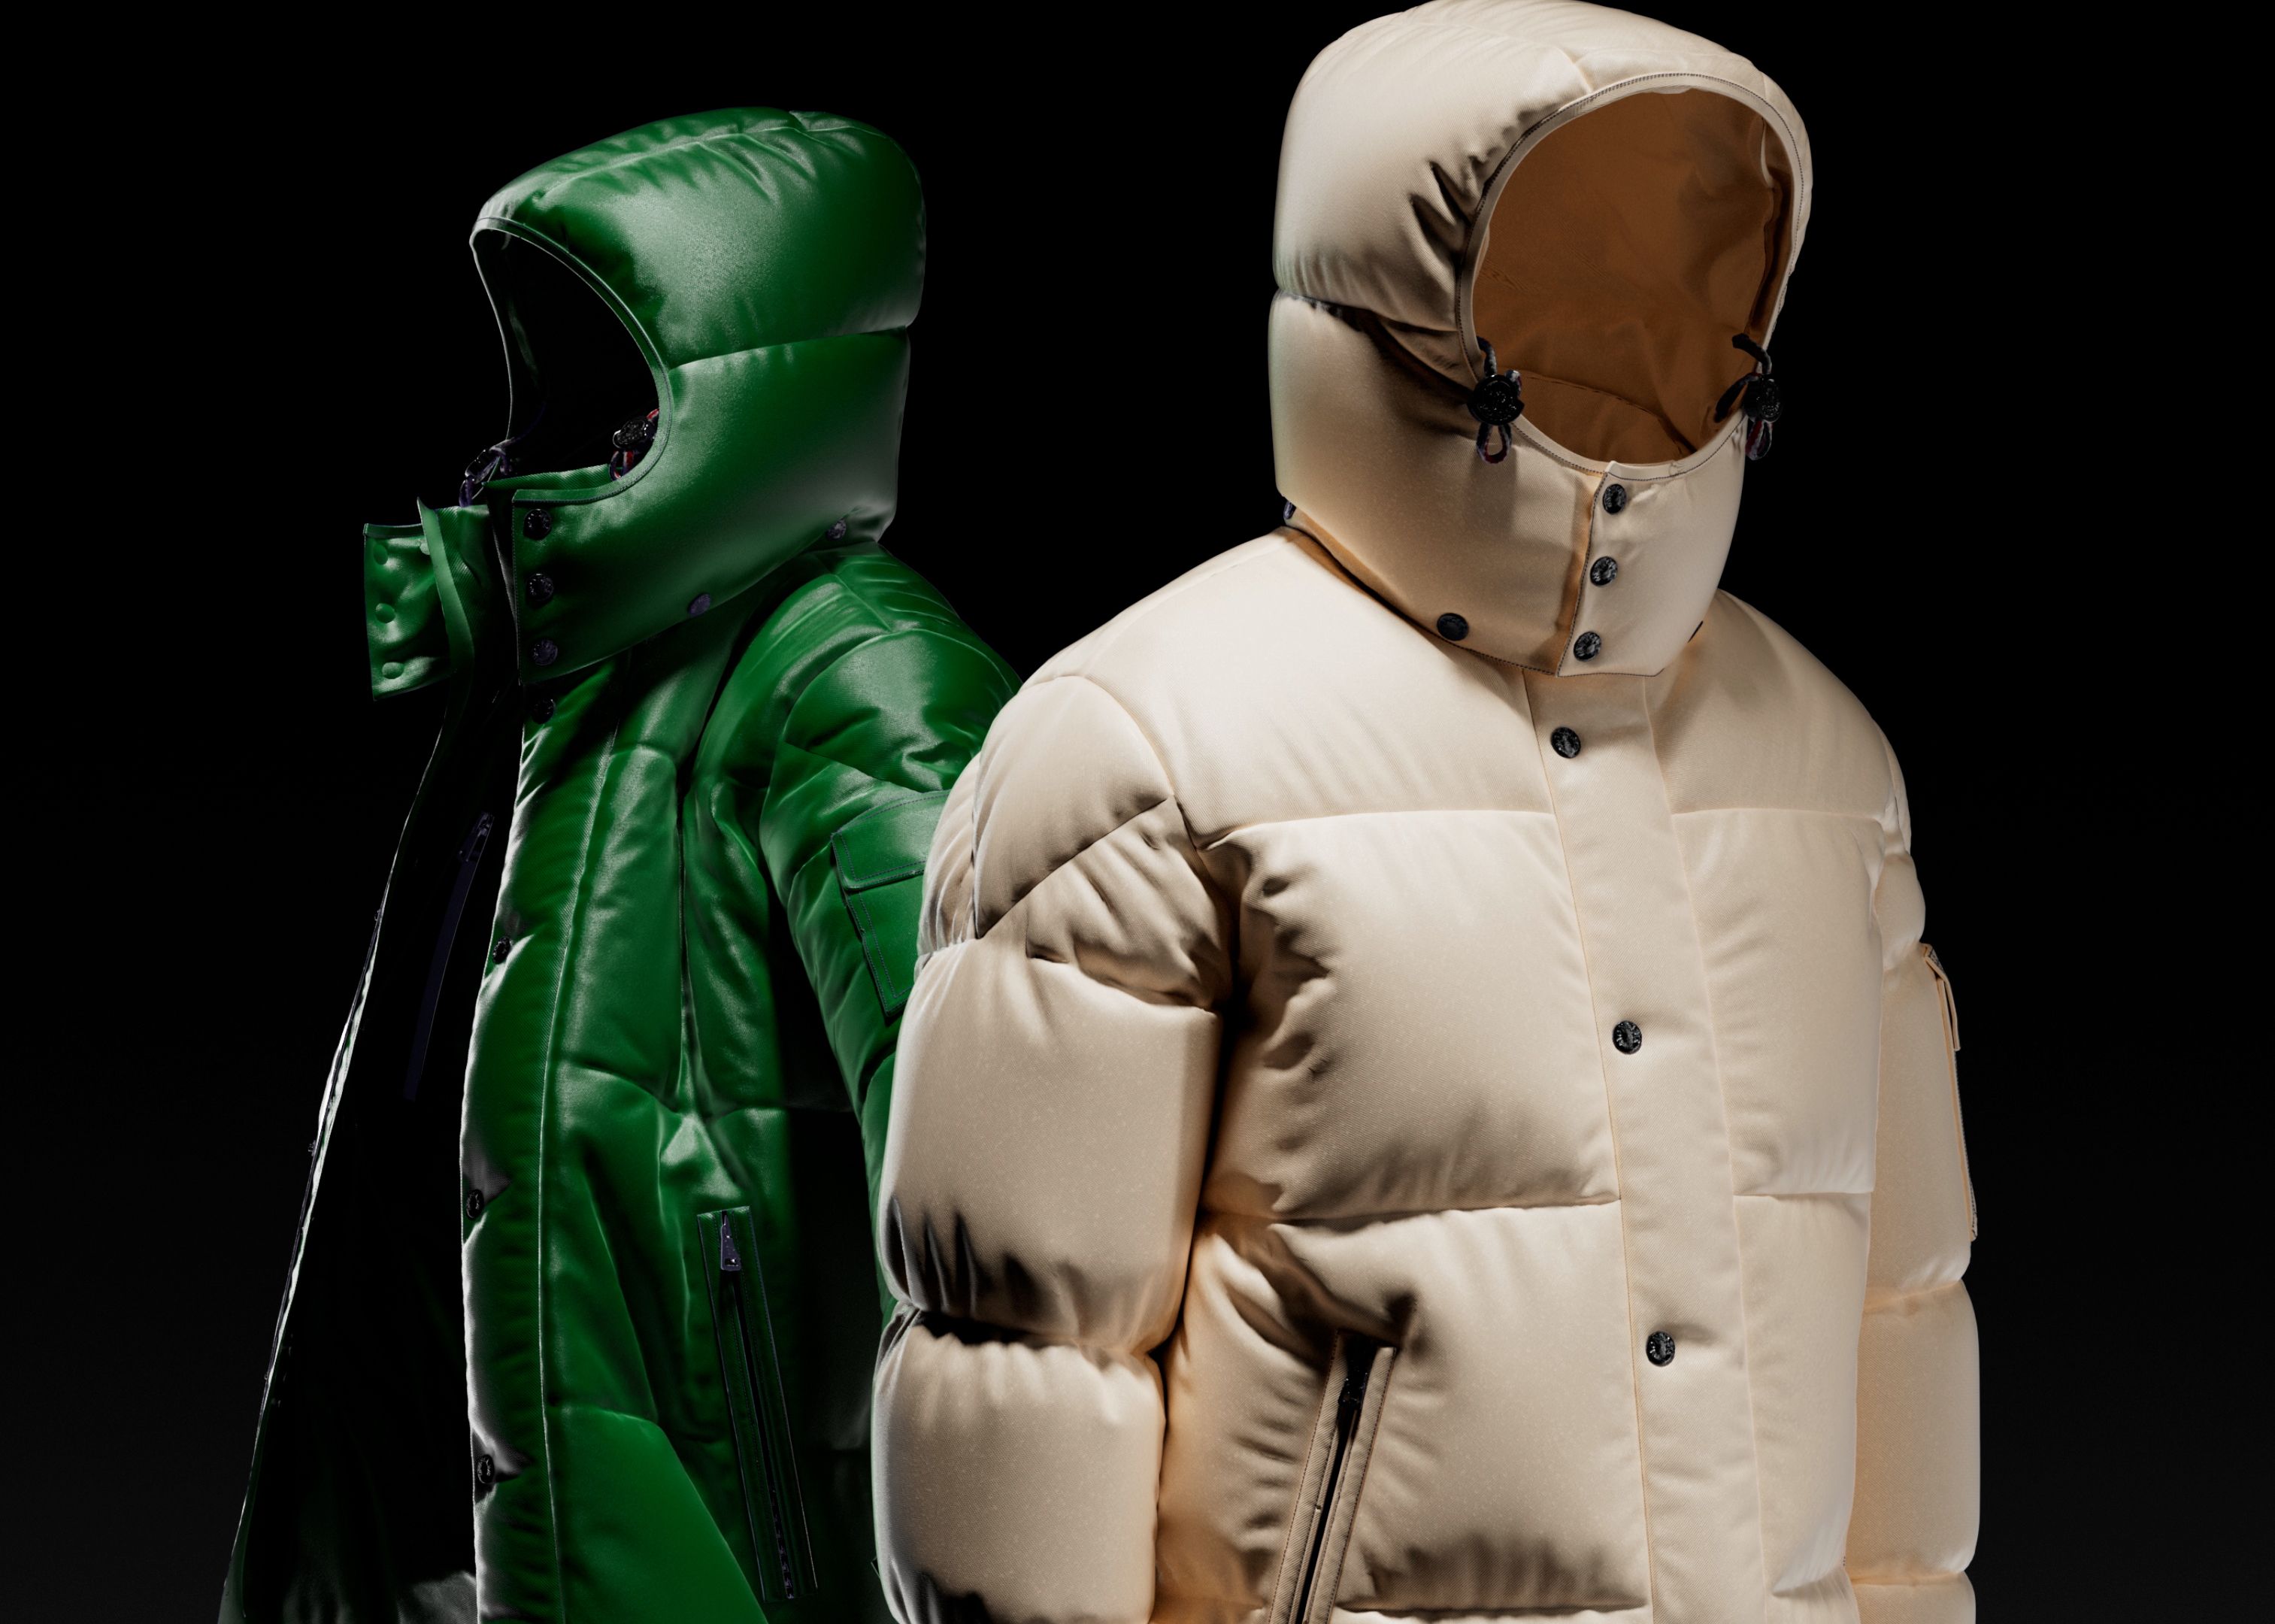 Moncler gallery image.